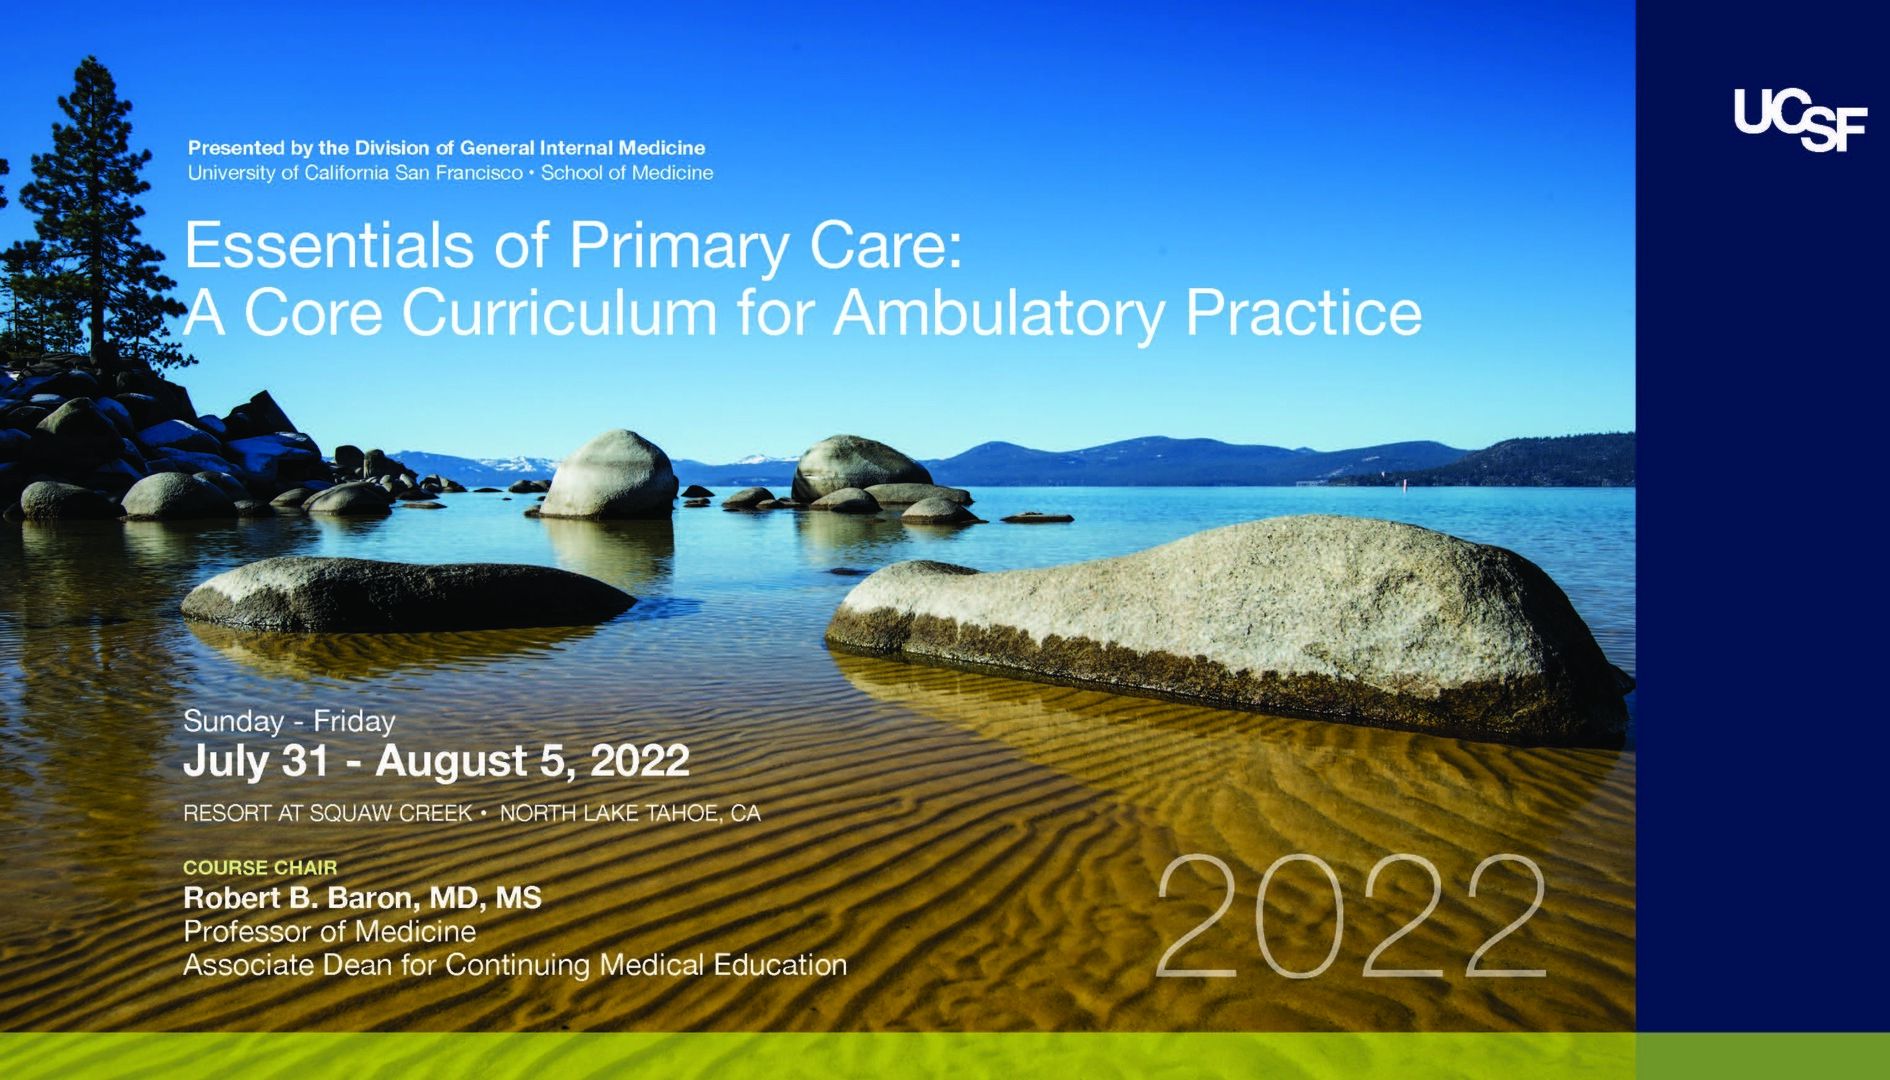 UCSF Essentials of Primary Care: A Core Curriculum for Ambulatory Practice